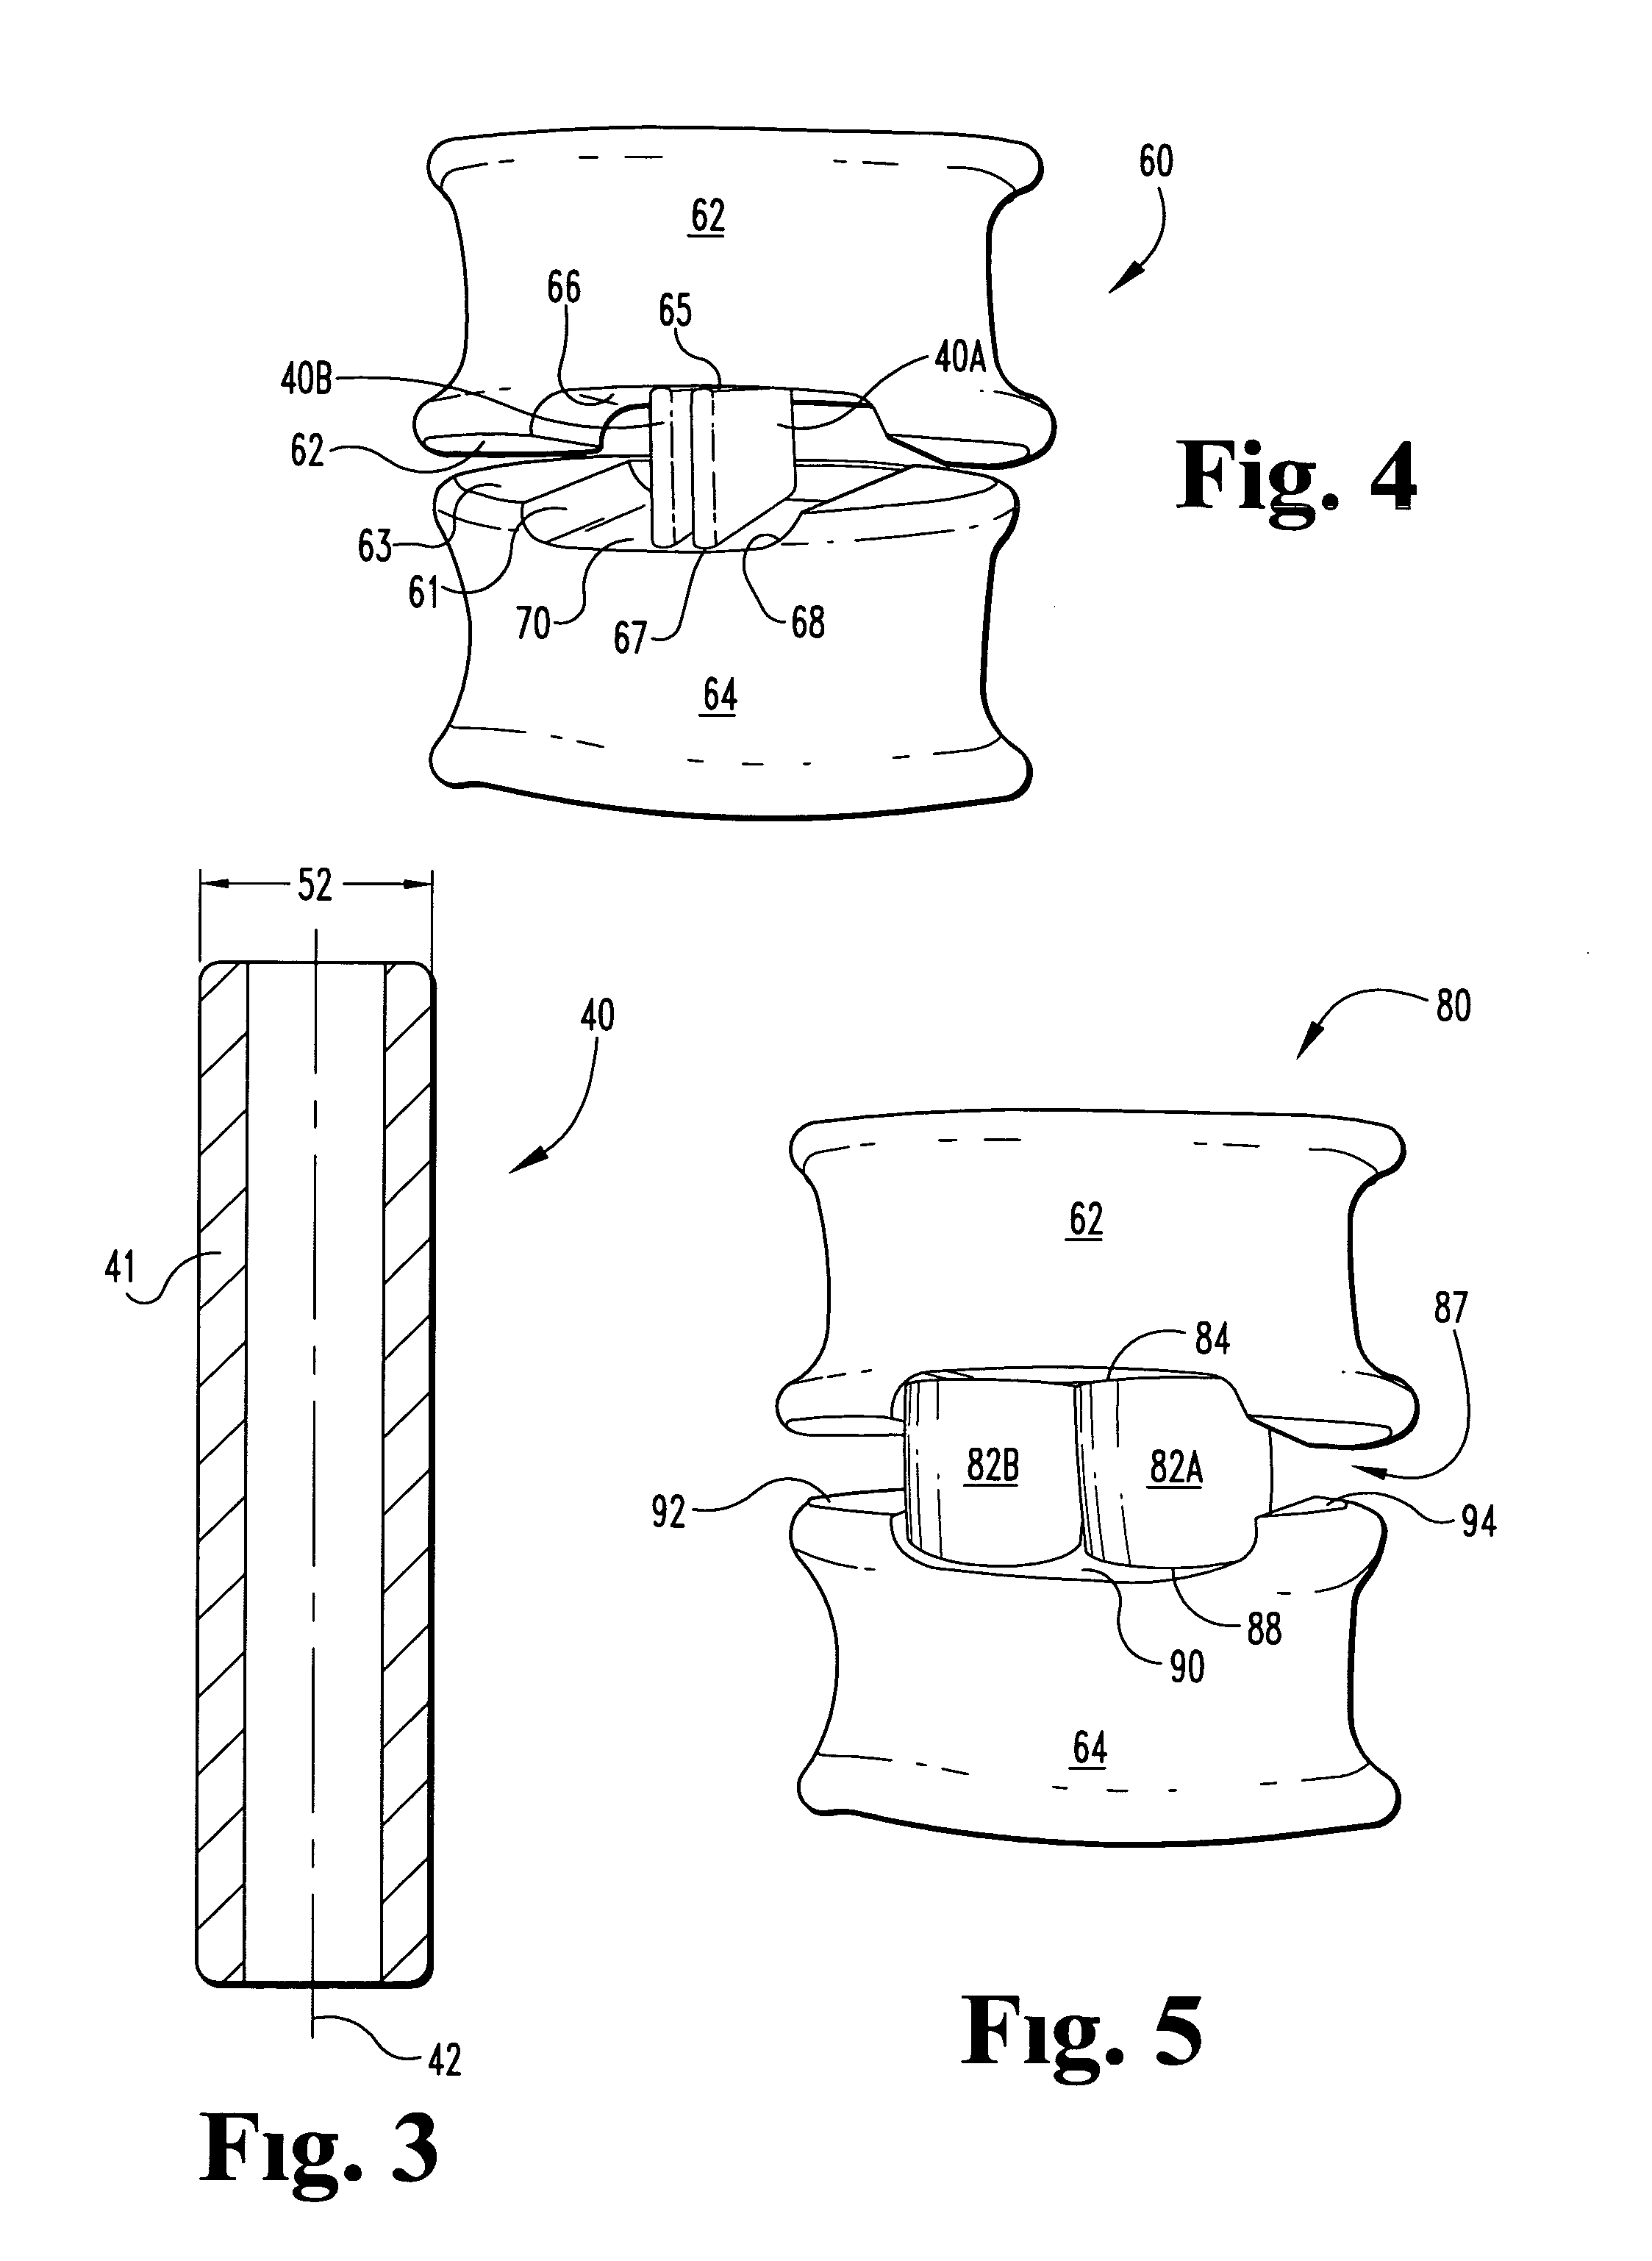 Laterally expanding intervertebral fusion device